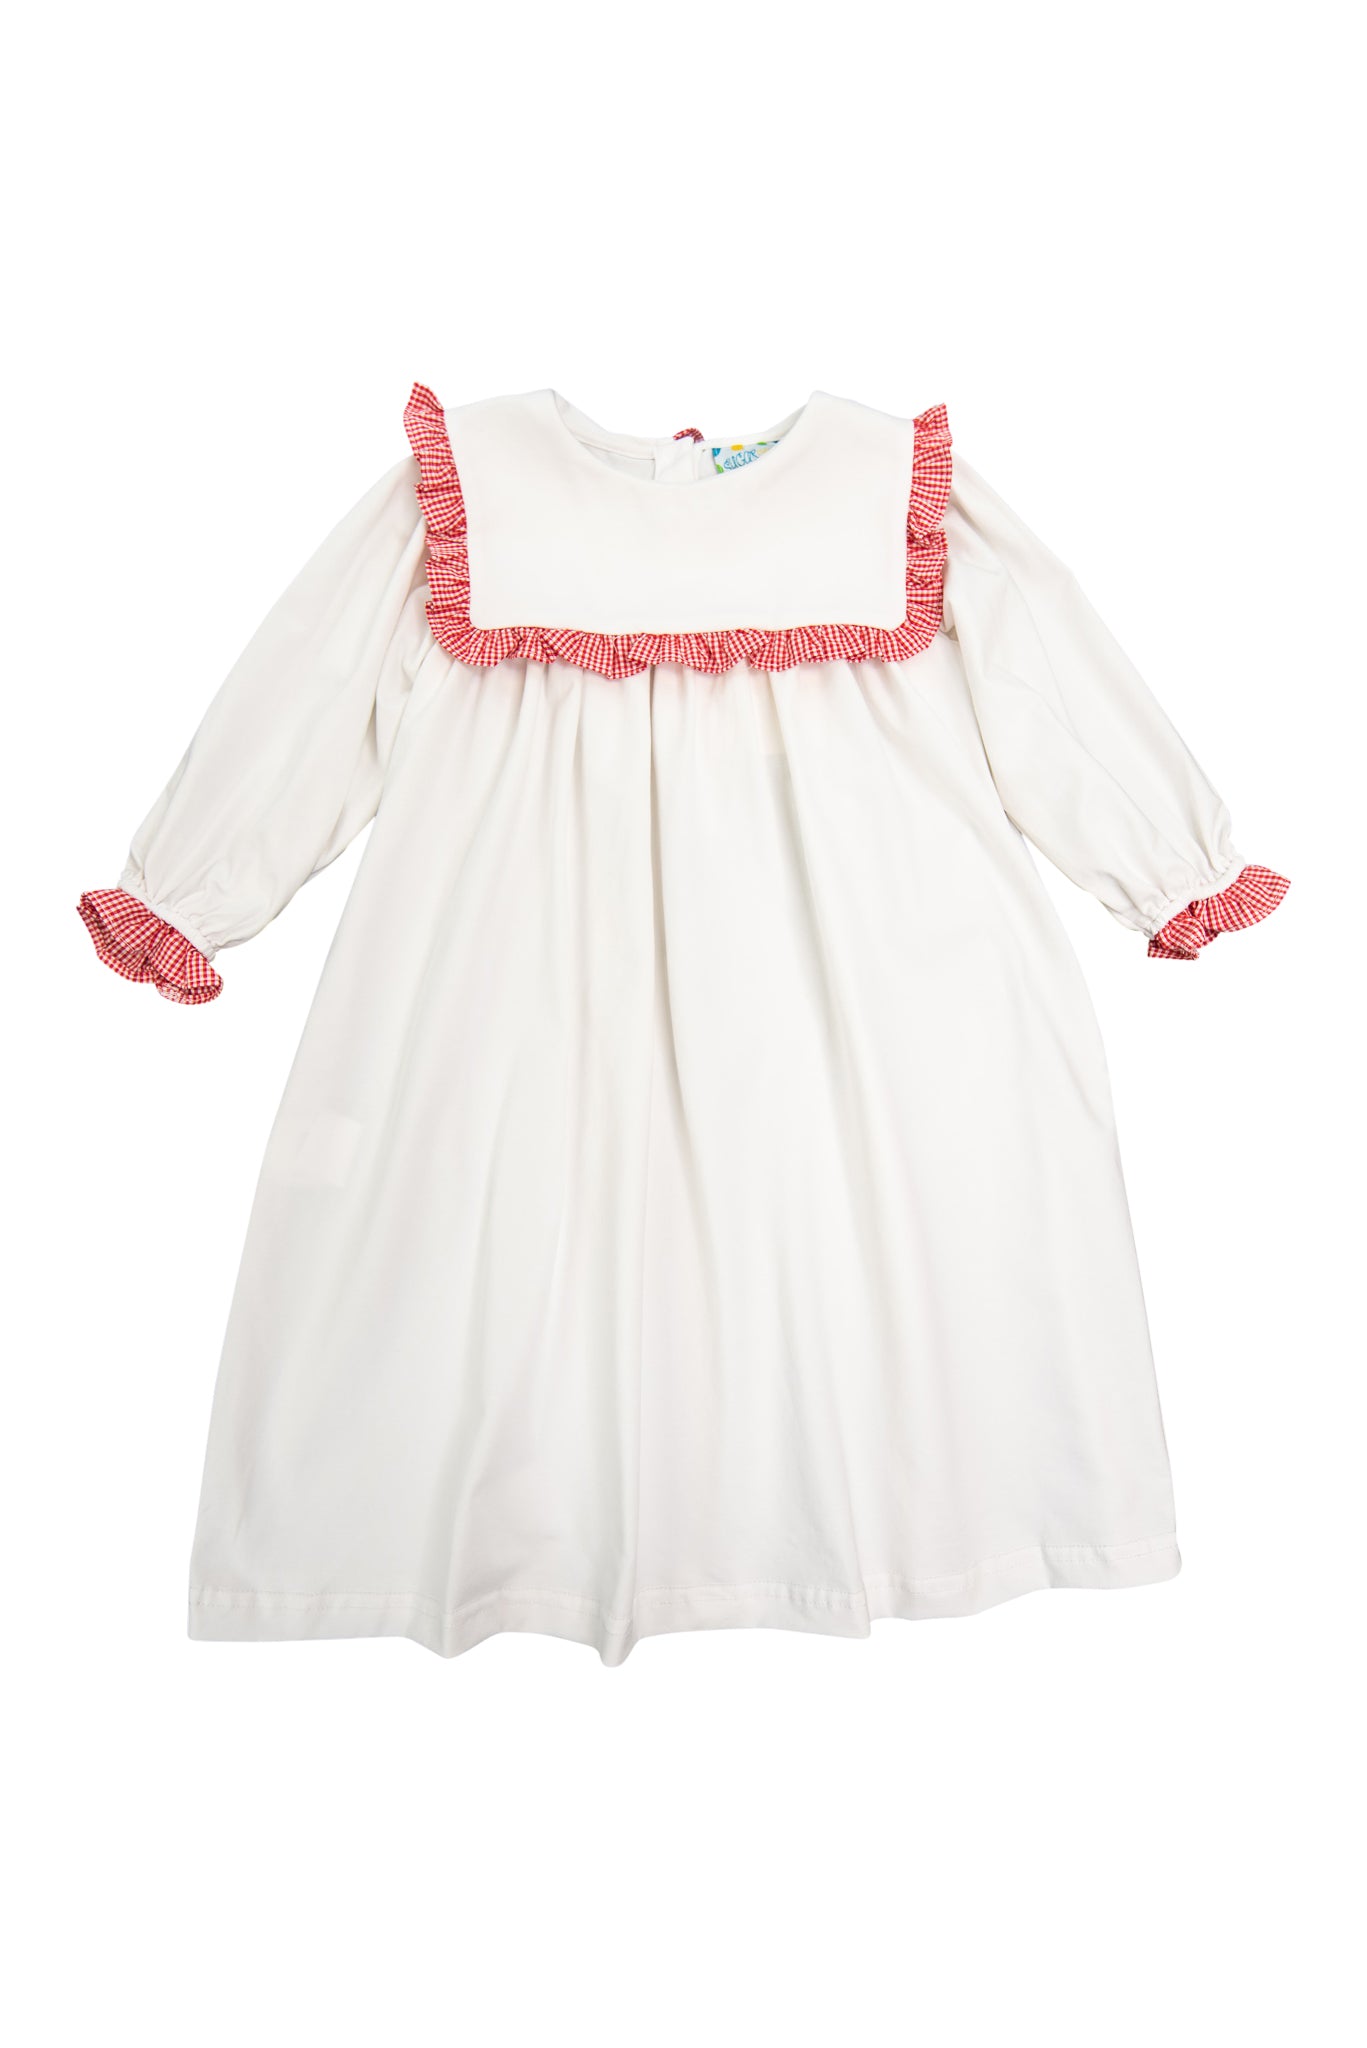 Girls White Square Collar Heirloom Length Nightgown